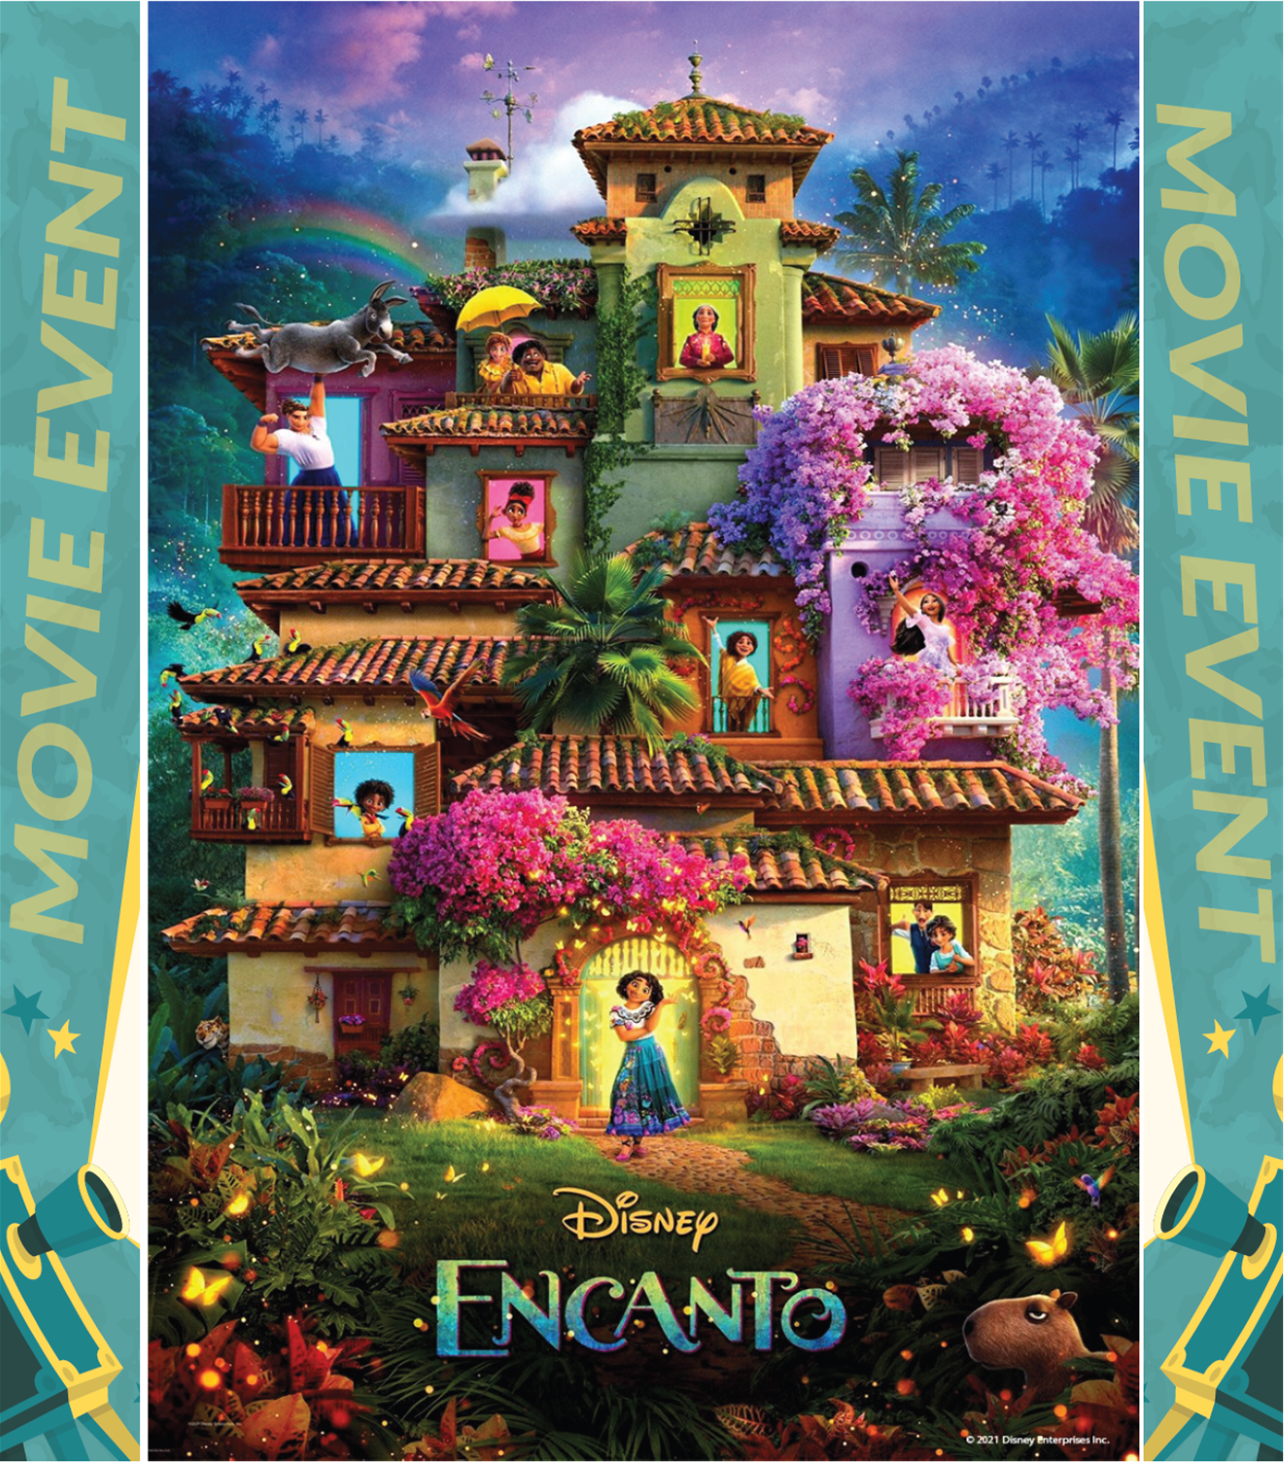 Encanto movie poster showing a fantastical multistory home with flowers growing over it